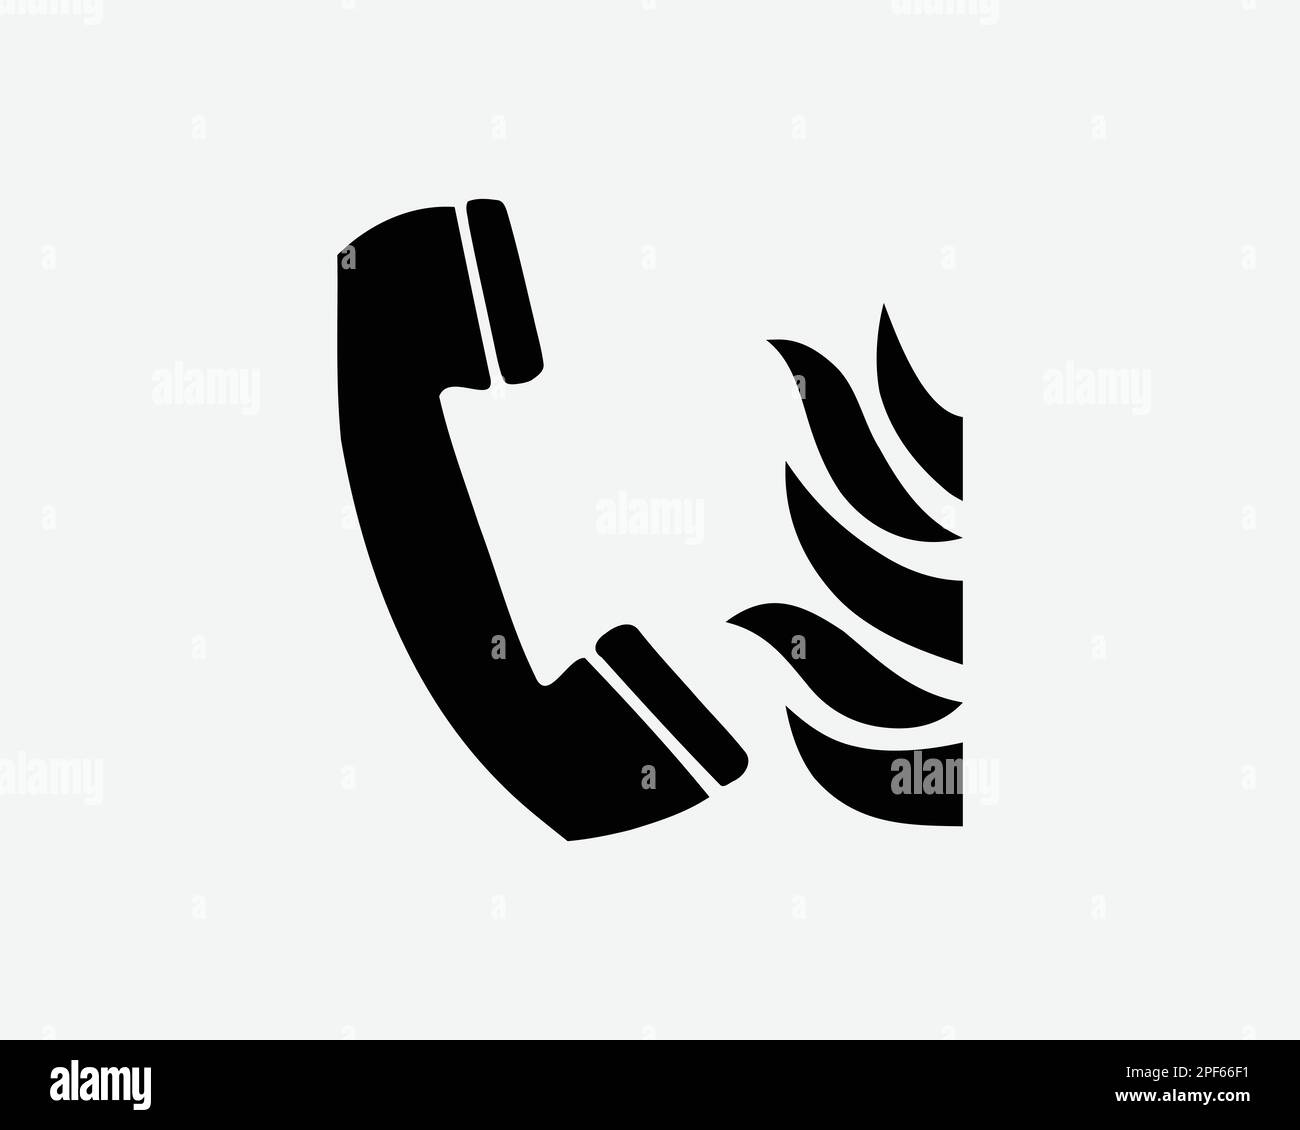 Fire Emergency Phone Telephone Call Point Rescue Help SOS Black White Silhouette Sign Symbol Icon Clipart Graphic Artwork Pictogram Illustration Vecto Stock Vector